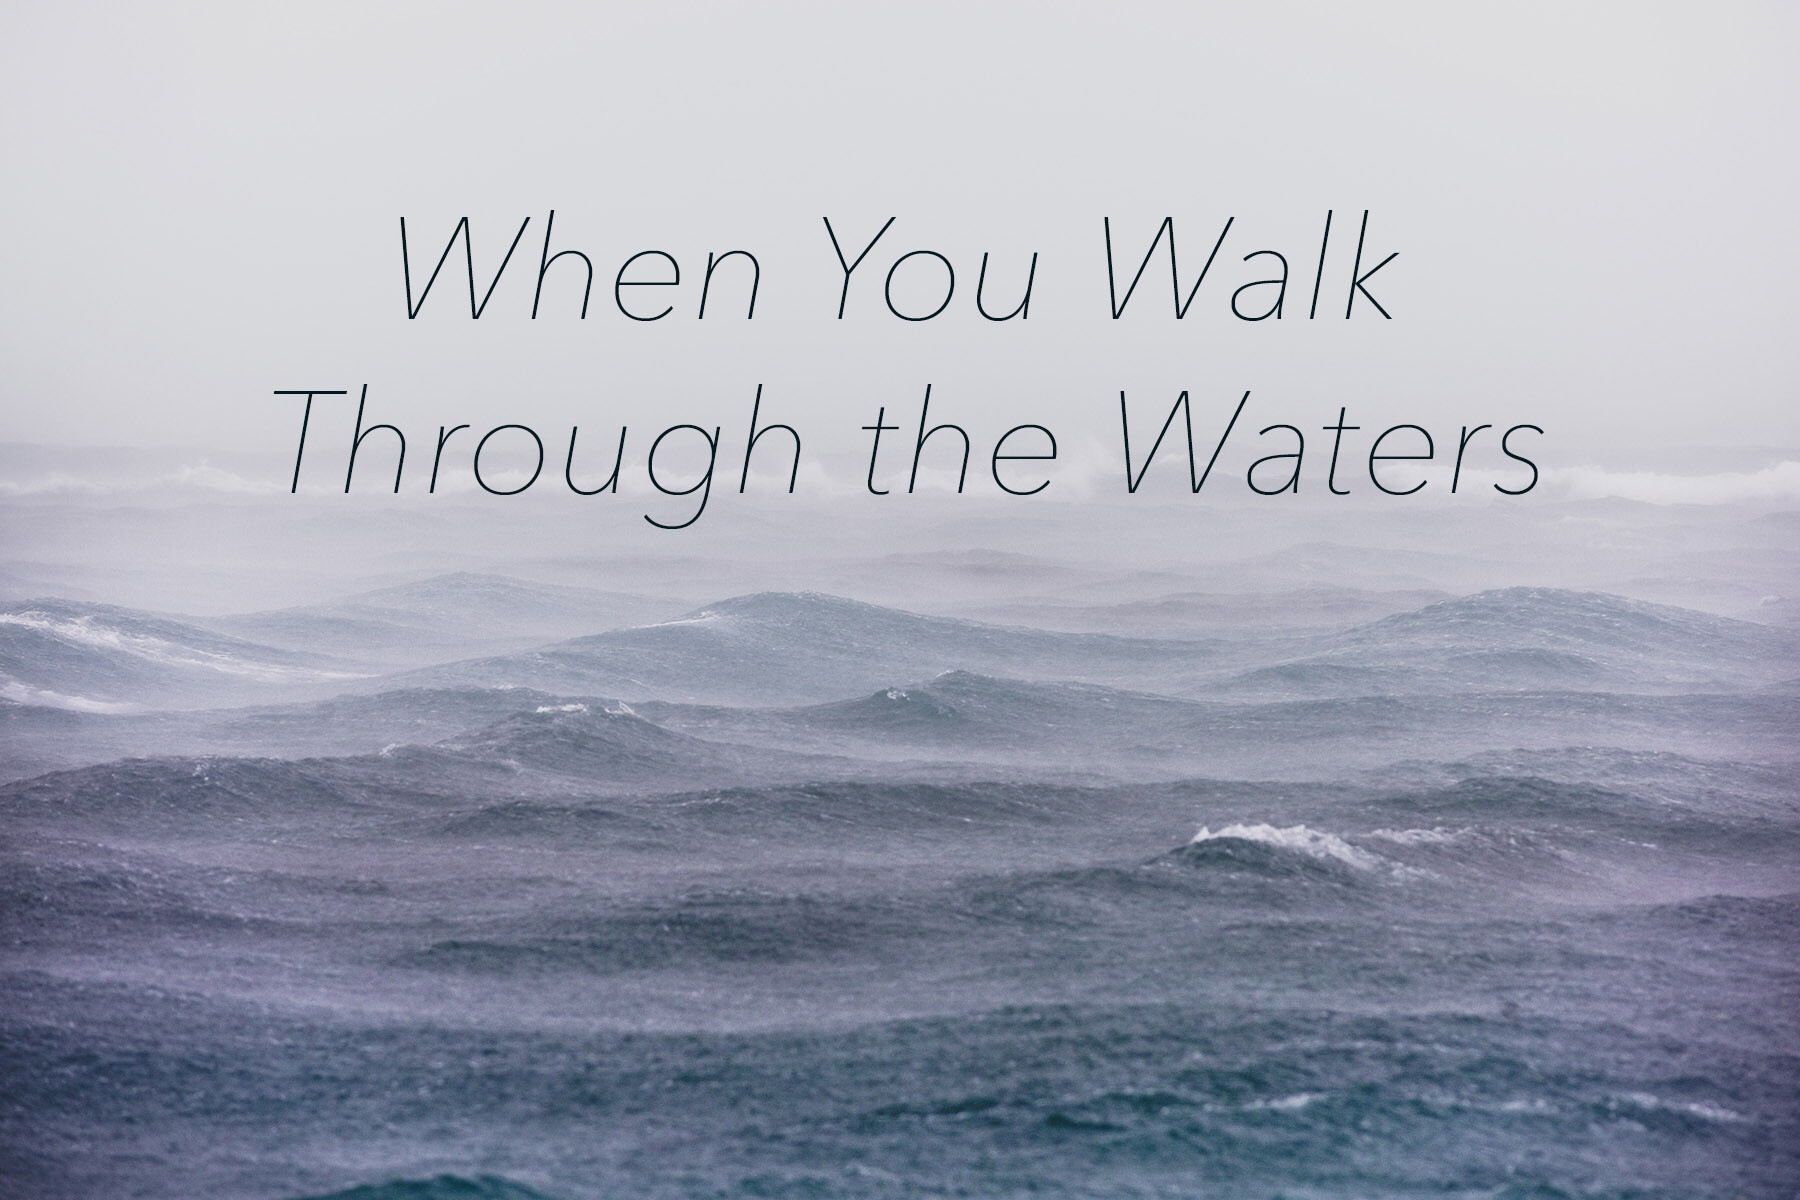 When You Walk Through the Waters